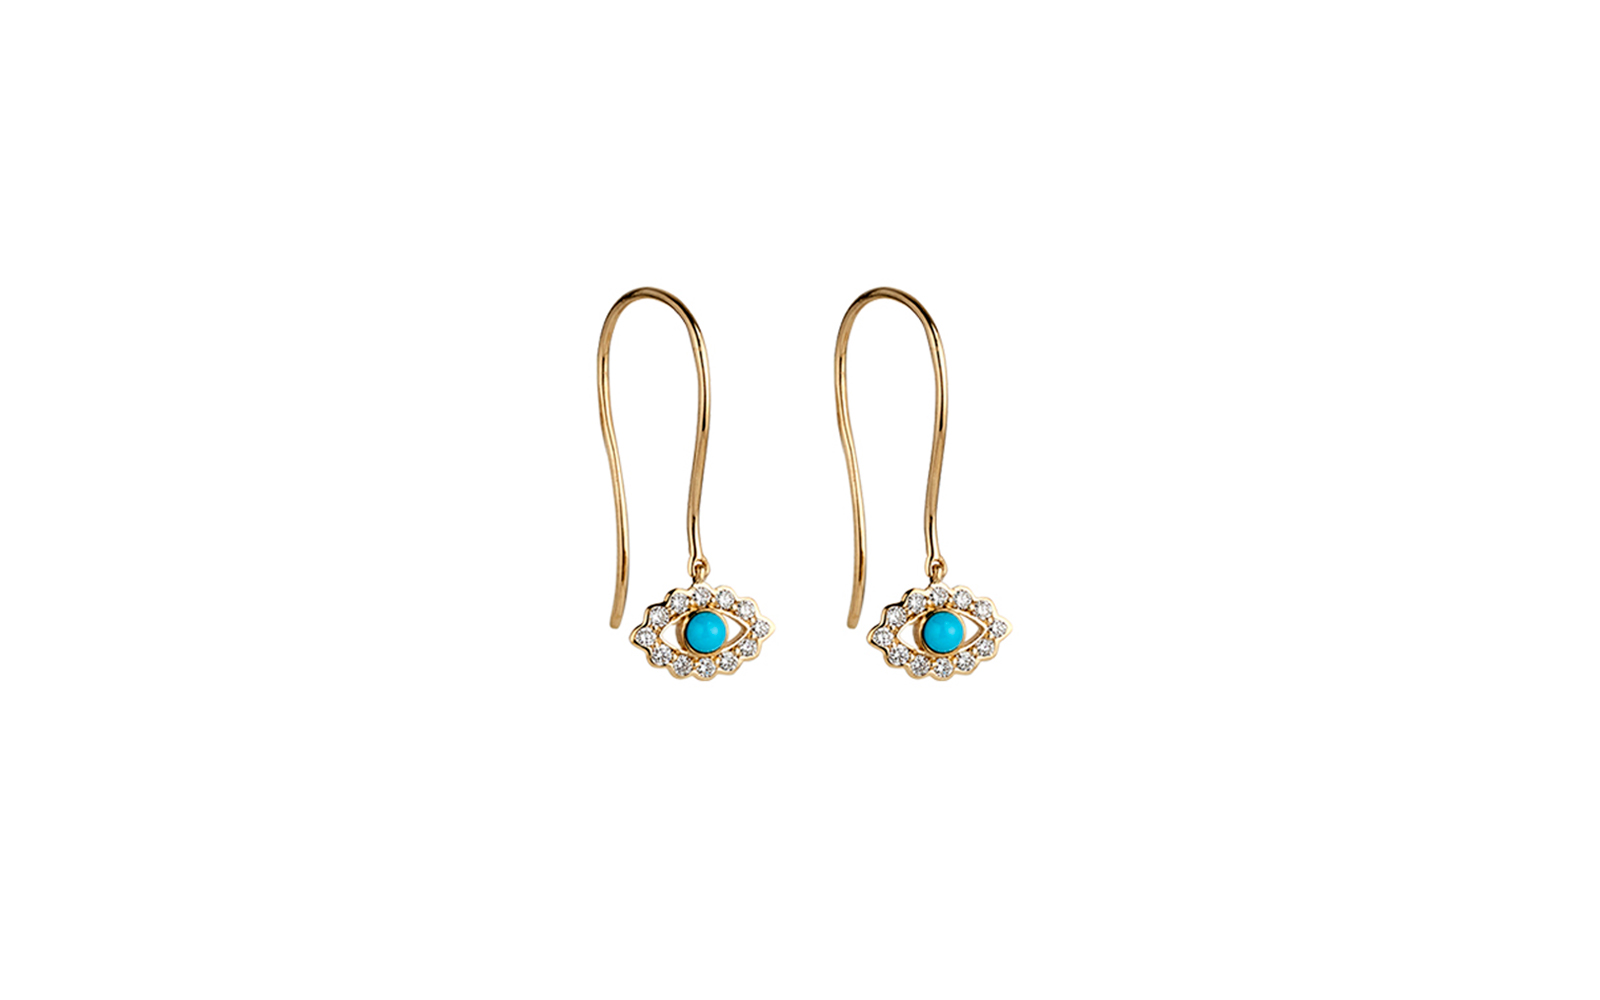 Guide Drop Earrings with Turquoise Centre 14k Yellow Gold